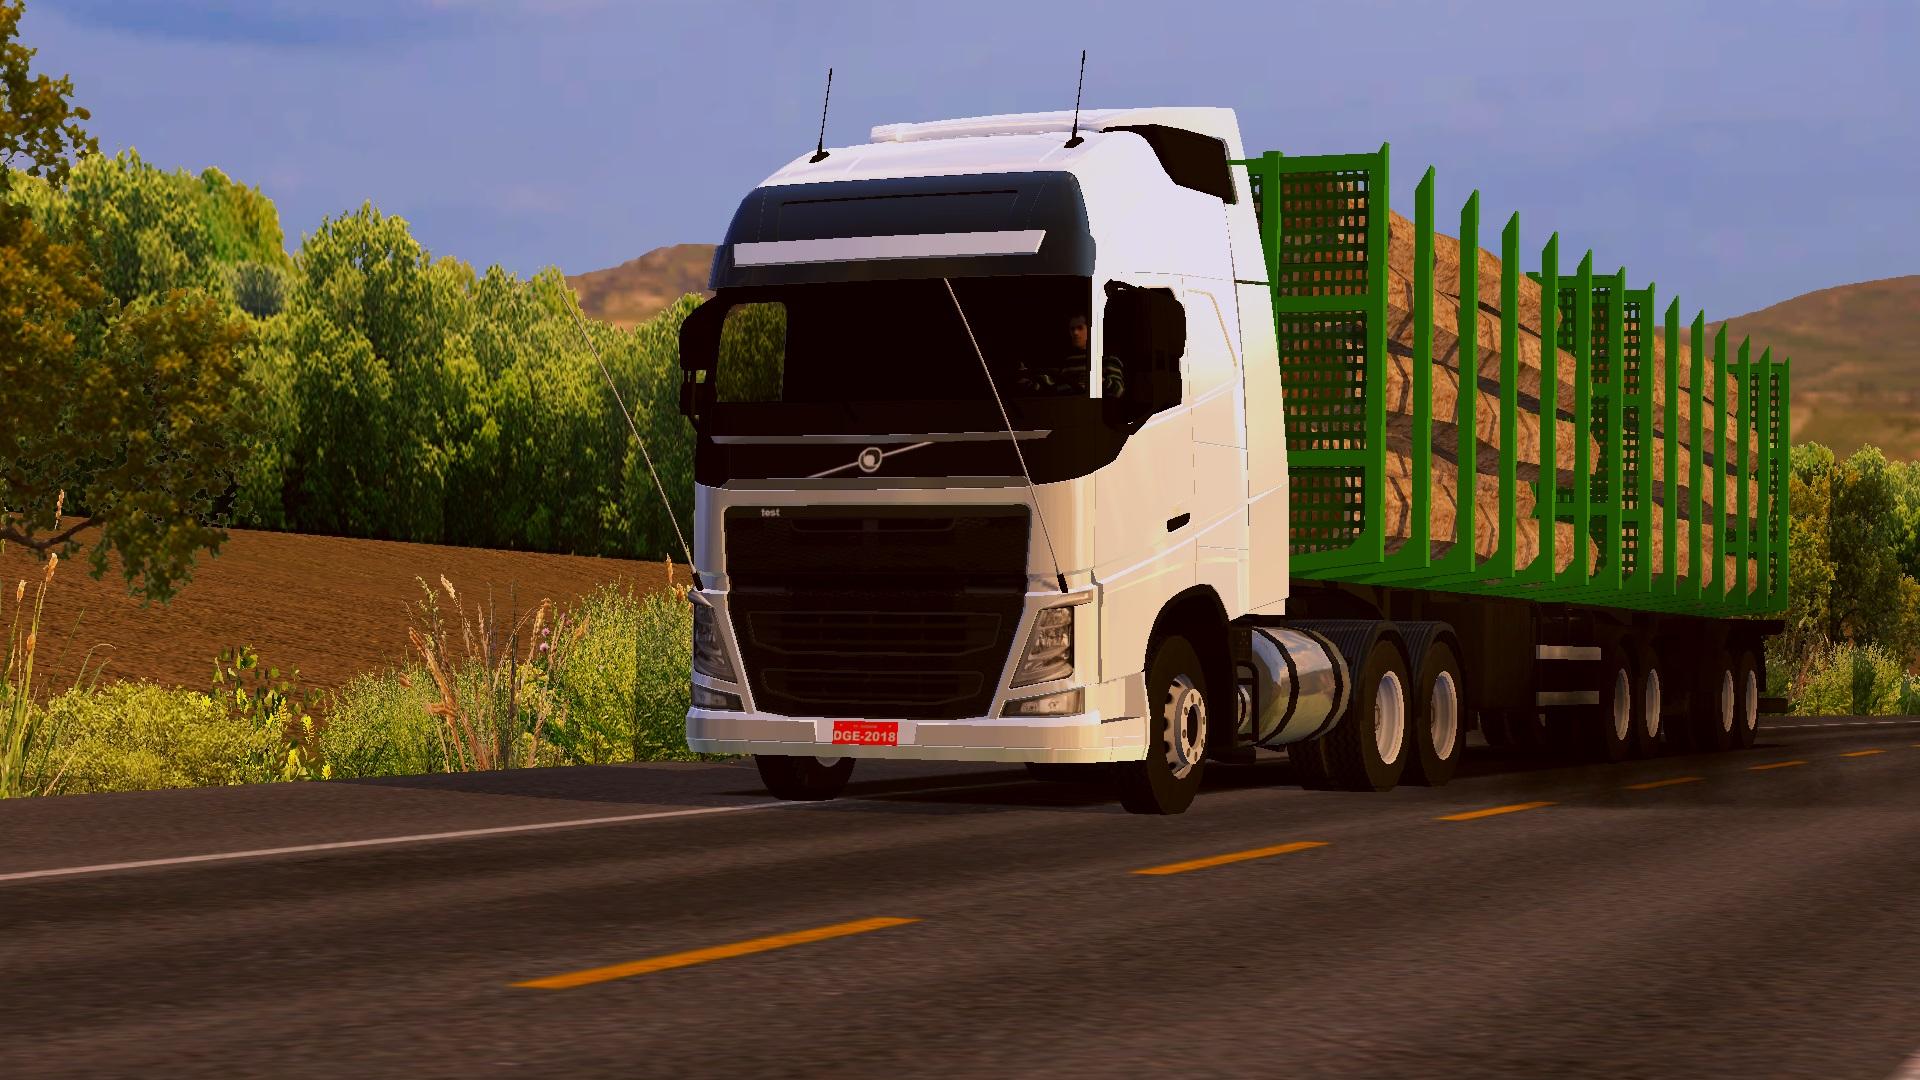 World Truck Driving Simulator for Android - APK Download - 